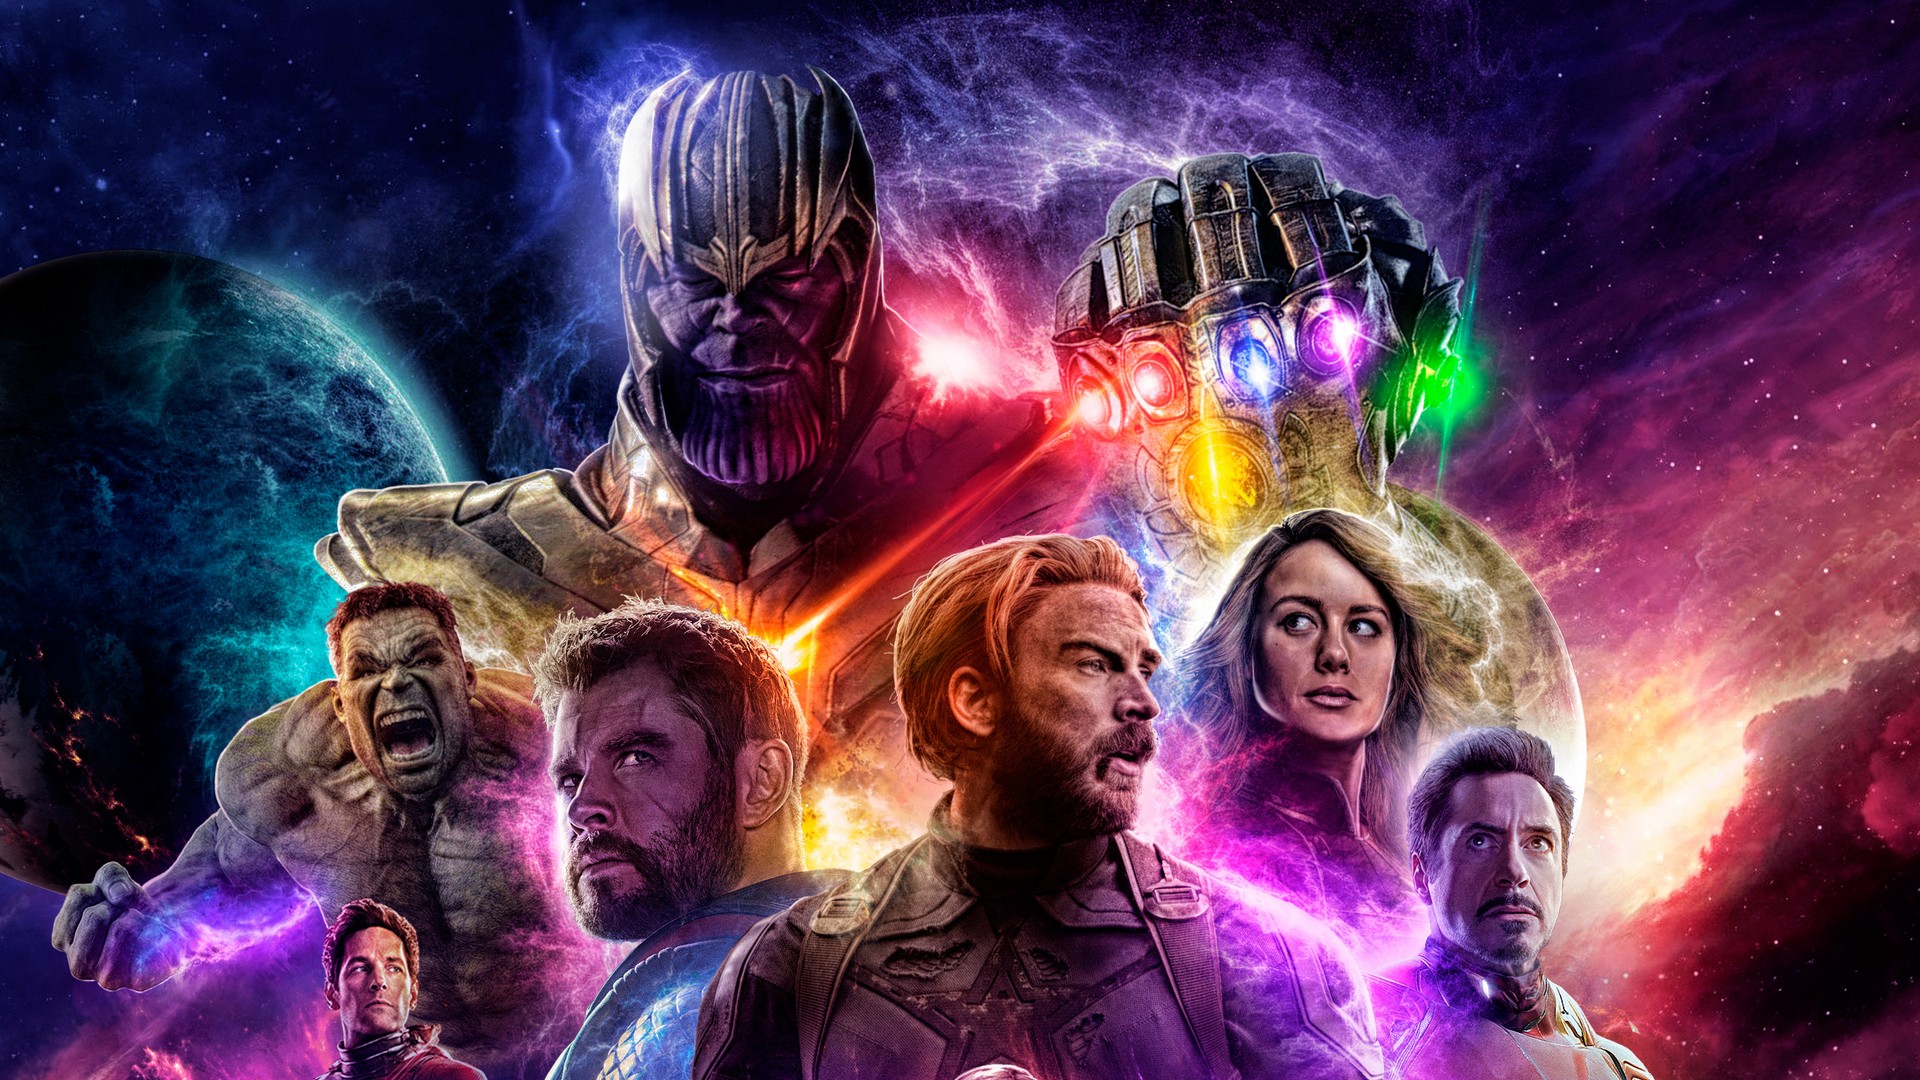 Avengers Endgame Poster HD Wallpaper with high-resolution 1920x1080 pixel. You can use this poster wallpaper for your Desktop Computers, Mac Screensavers, Windows Backgrounds, iPhone Wallpapers, Tablet or Android Lock screen and another Mobile device